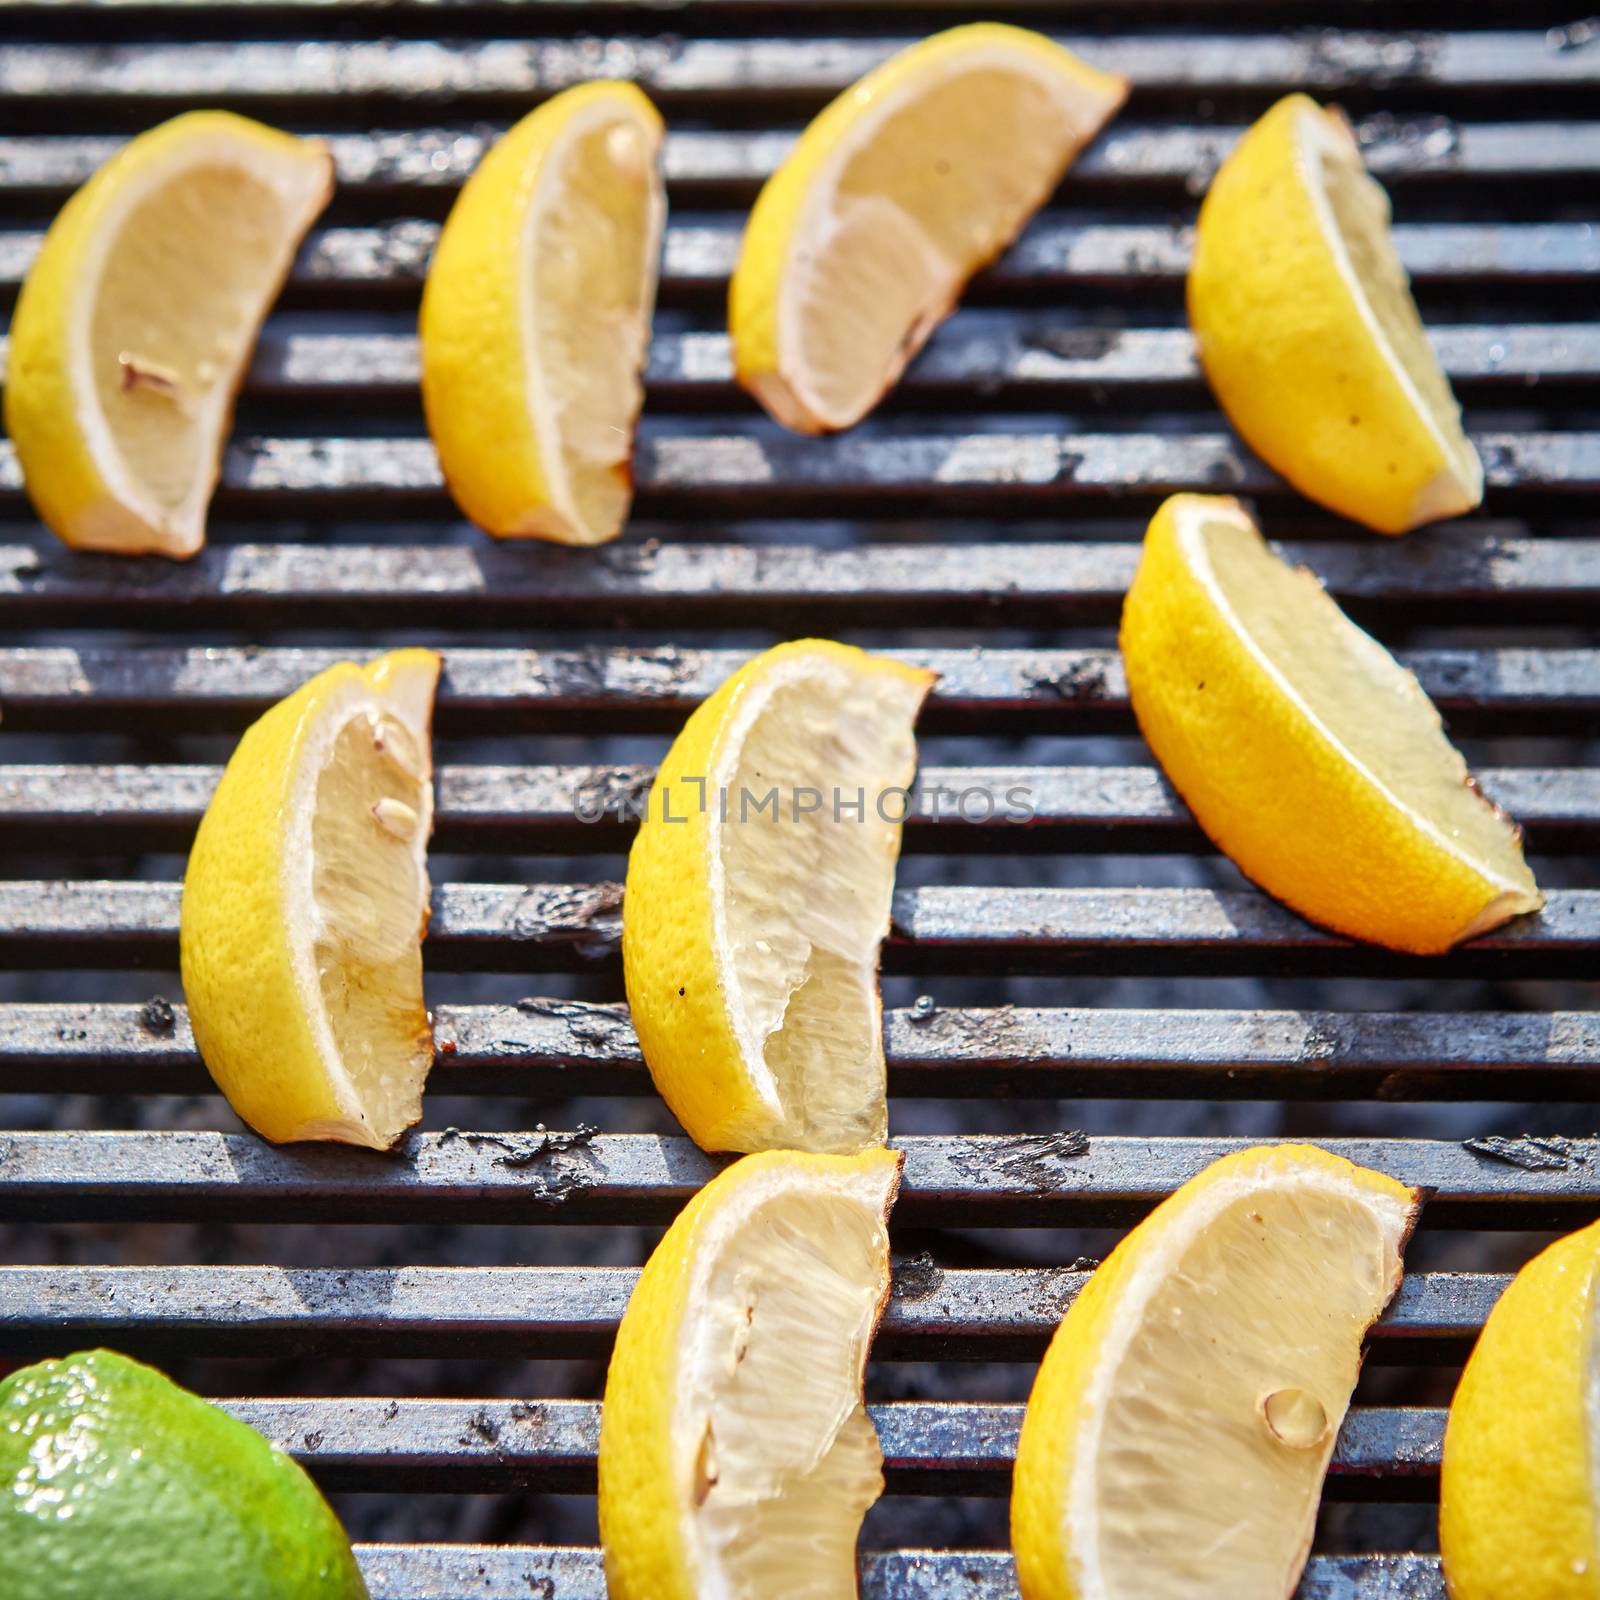 The lemons grilled. Top view. Close up